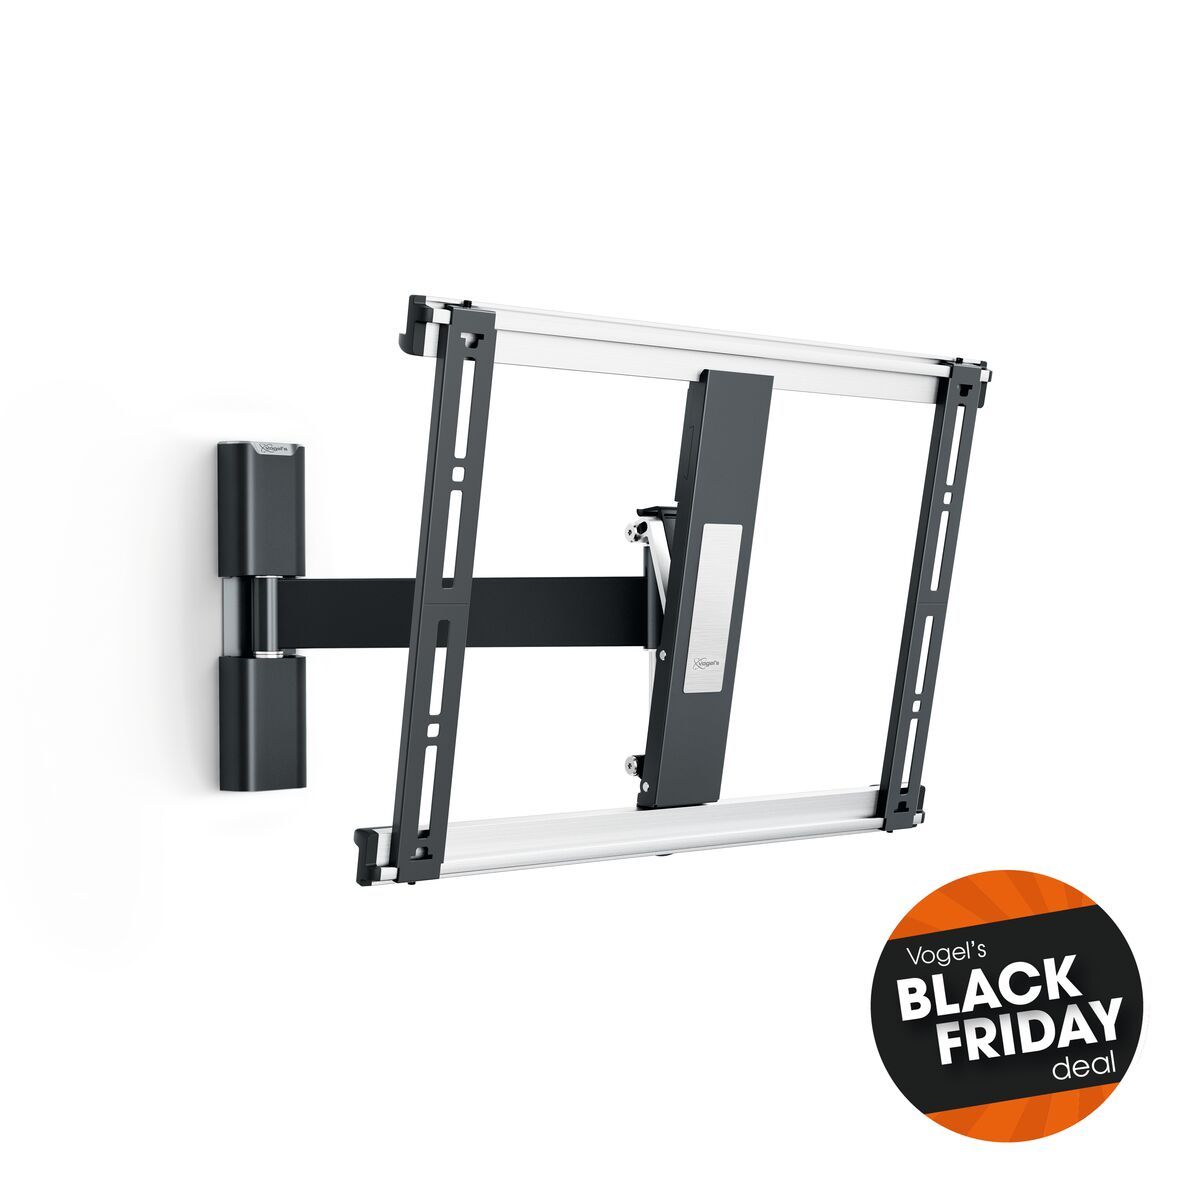 Vogel's THIN 425 ExtraThin Full-Motion TV Wall Mount - Suitable for 26 up to 55 inch TVs - Motion (up to 120°) - Tilt up to 20° - Promo